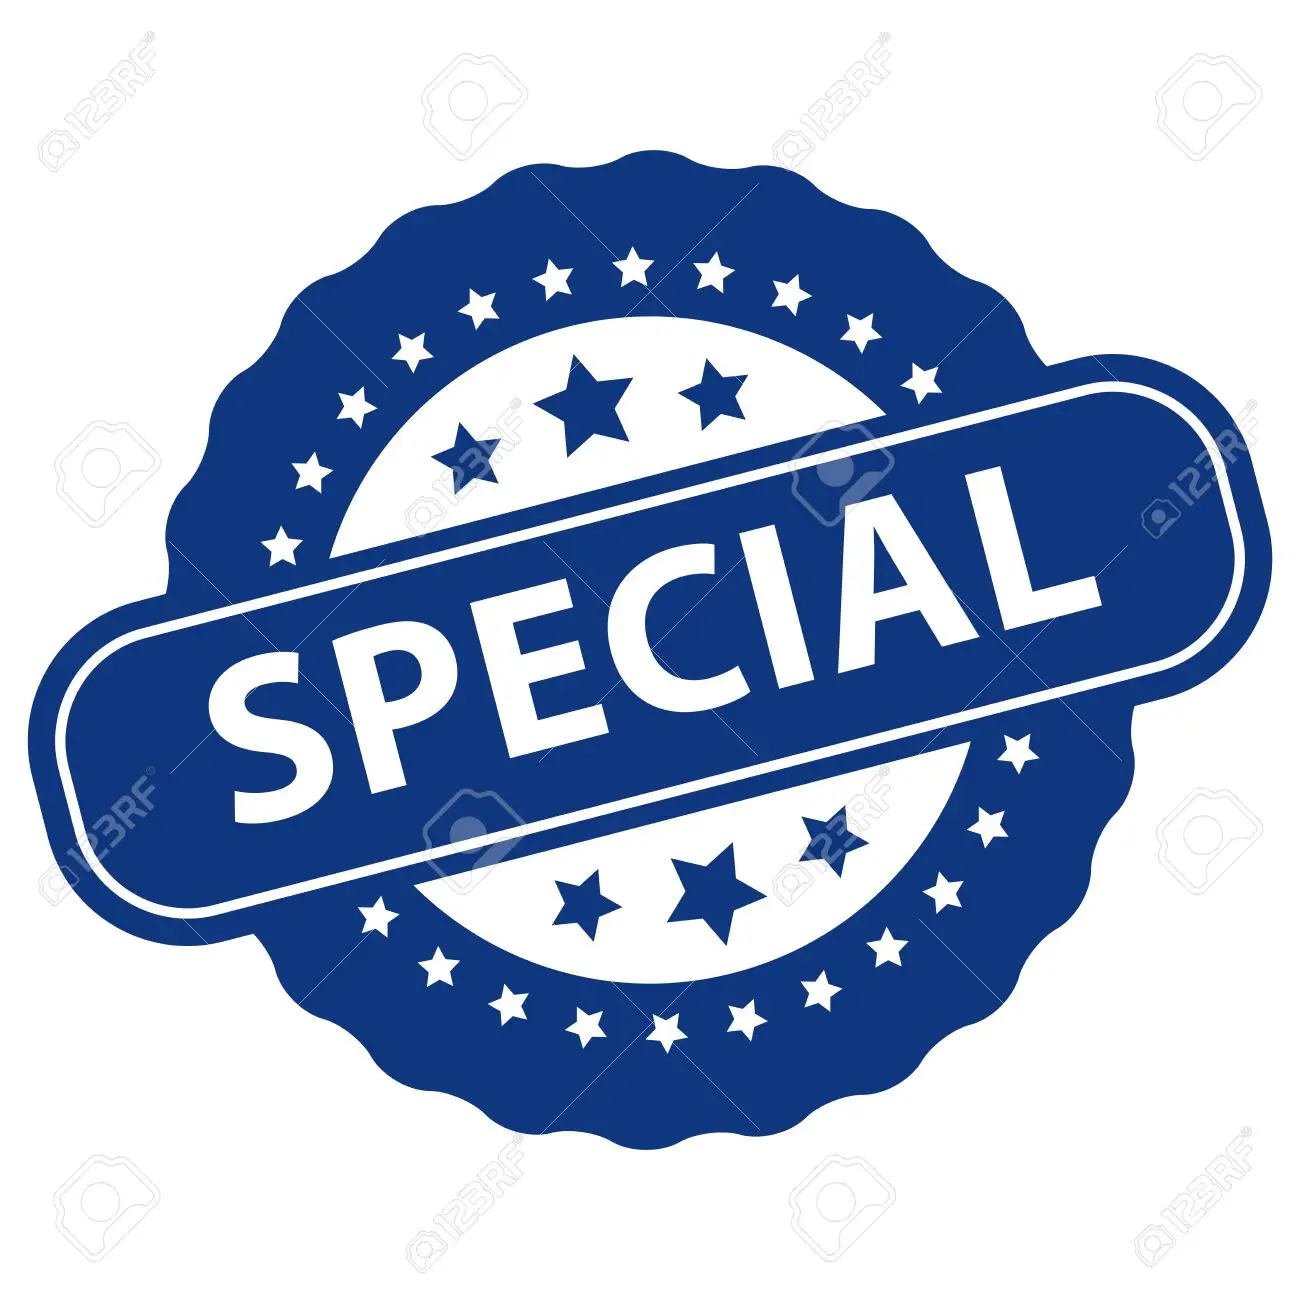 36532836-blue-special-icon-badge-label-or-sticker-isolated-on-white-background